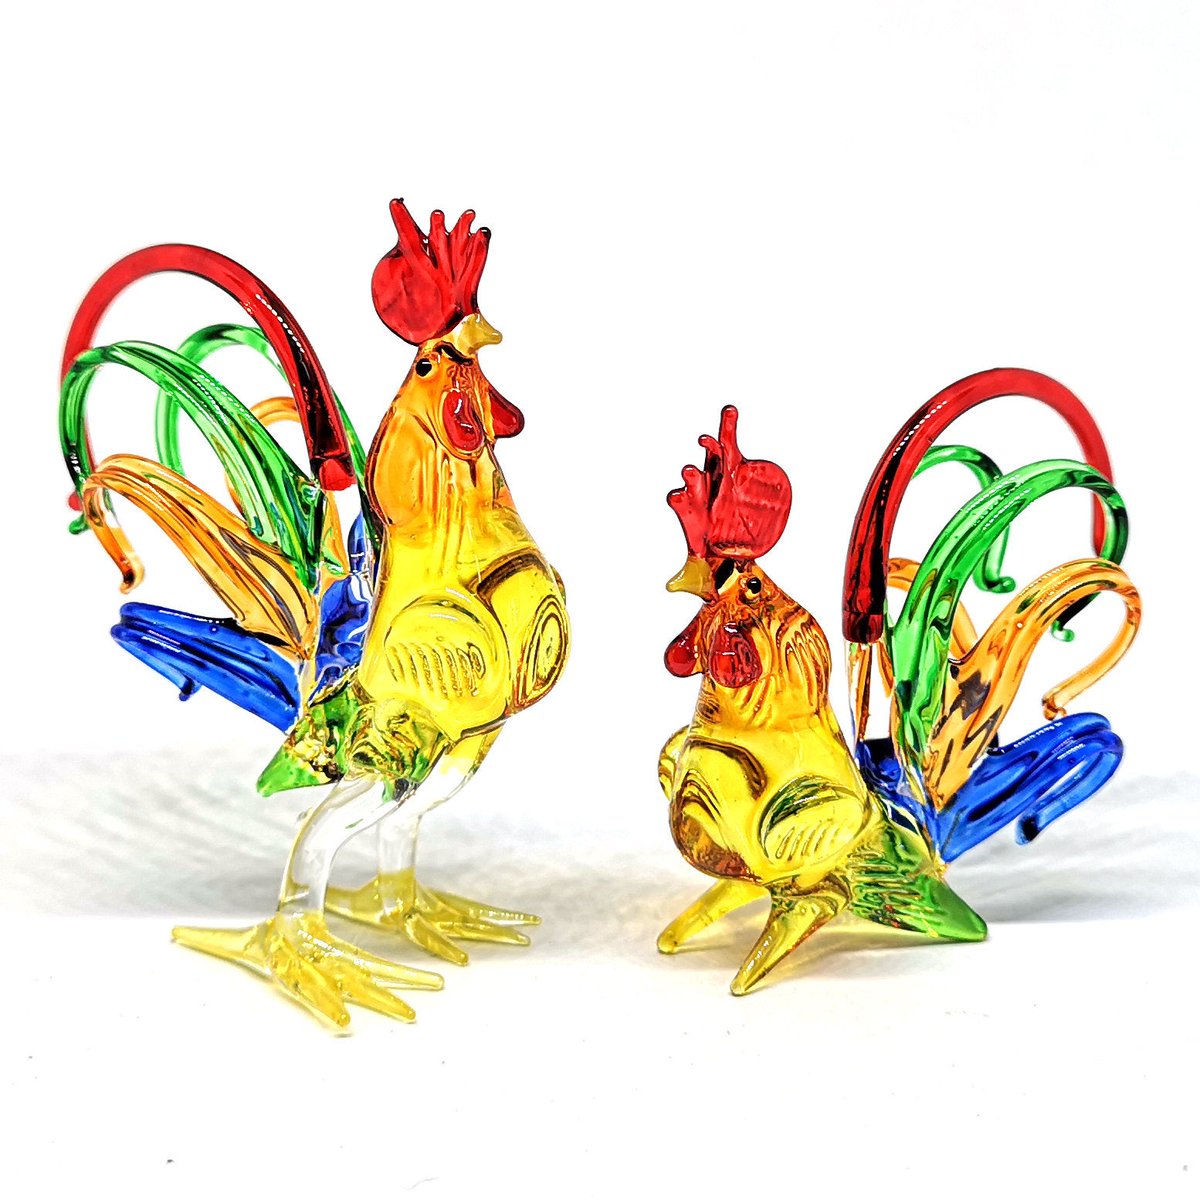 Excited to share the latest addition to my #etsy shop: Chicken Figurines Collectibles Hand Blown Glass Rooster Set of 2 by ZOOCRAFT etsy.me/3ccVnMK #yellow #anniversary #red #tabletop #glassanimal #blownglass #lampworkglass #glasschicken #glassrooster